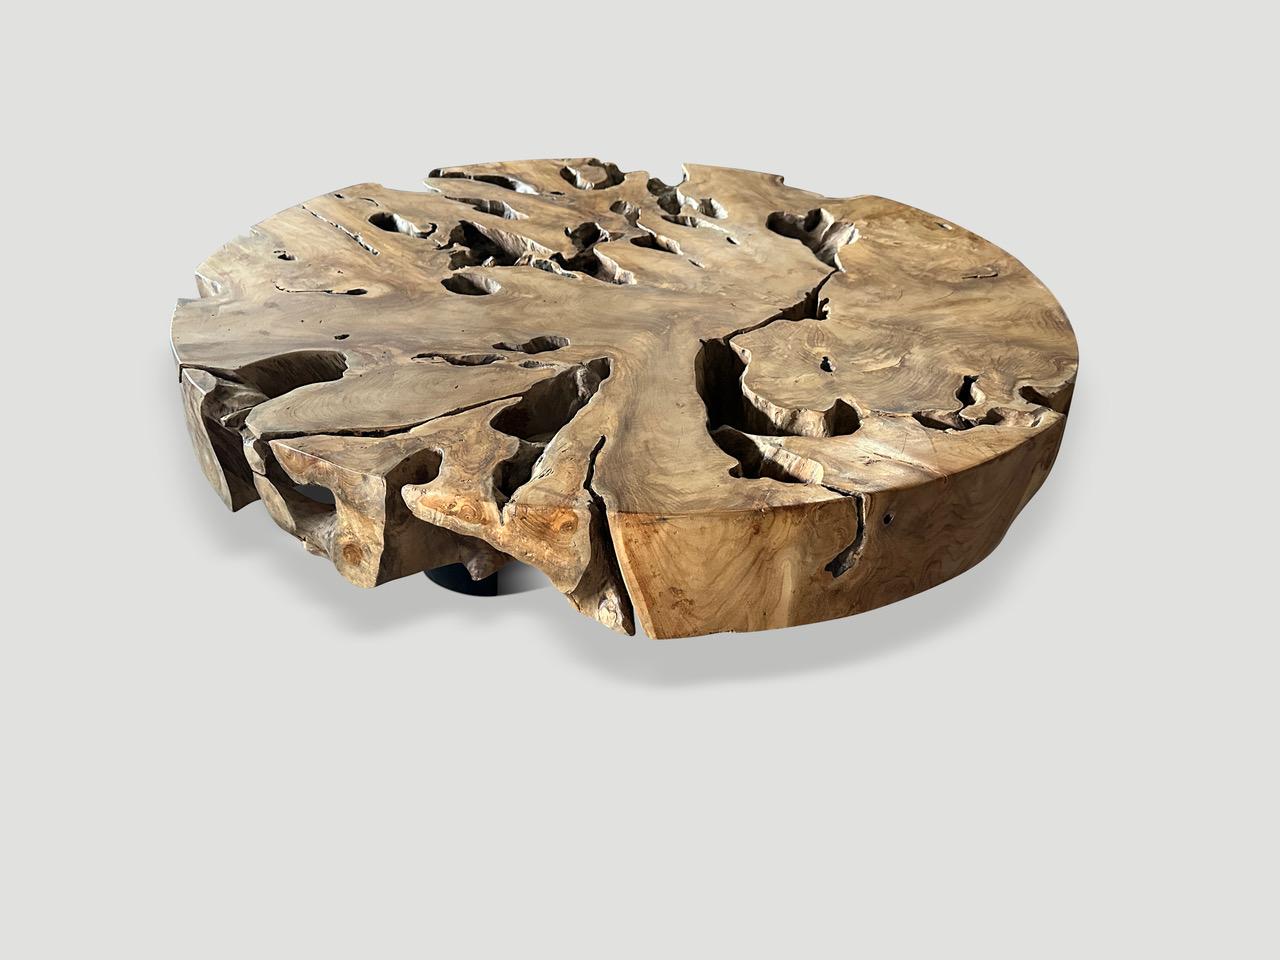 Reclaimed teak root coffee table. Hand carved into this beautiful usable shape whilst respecting the natural organic wood. This impressive five inch thick top floats on three minimalist steel legs. We polished the aged teak with a natural oil